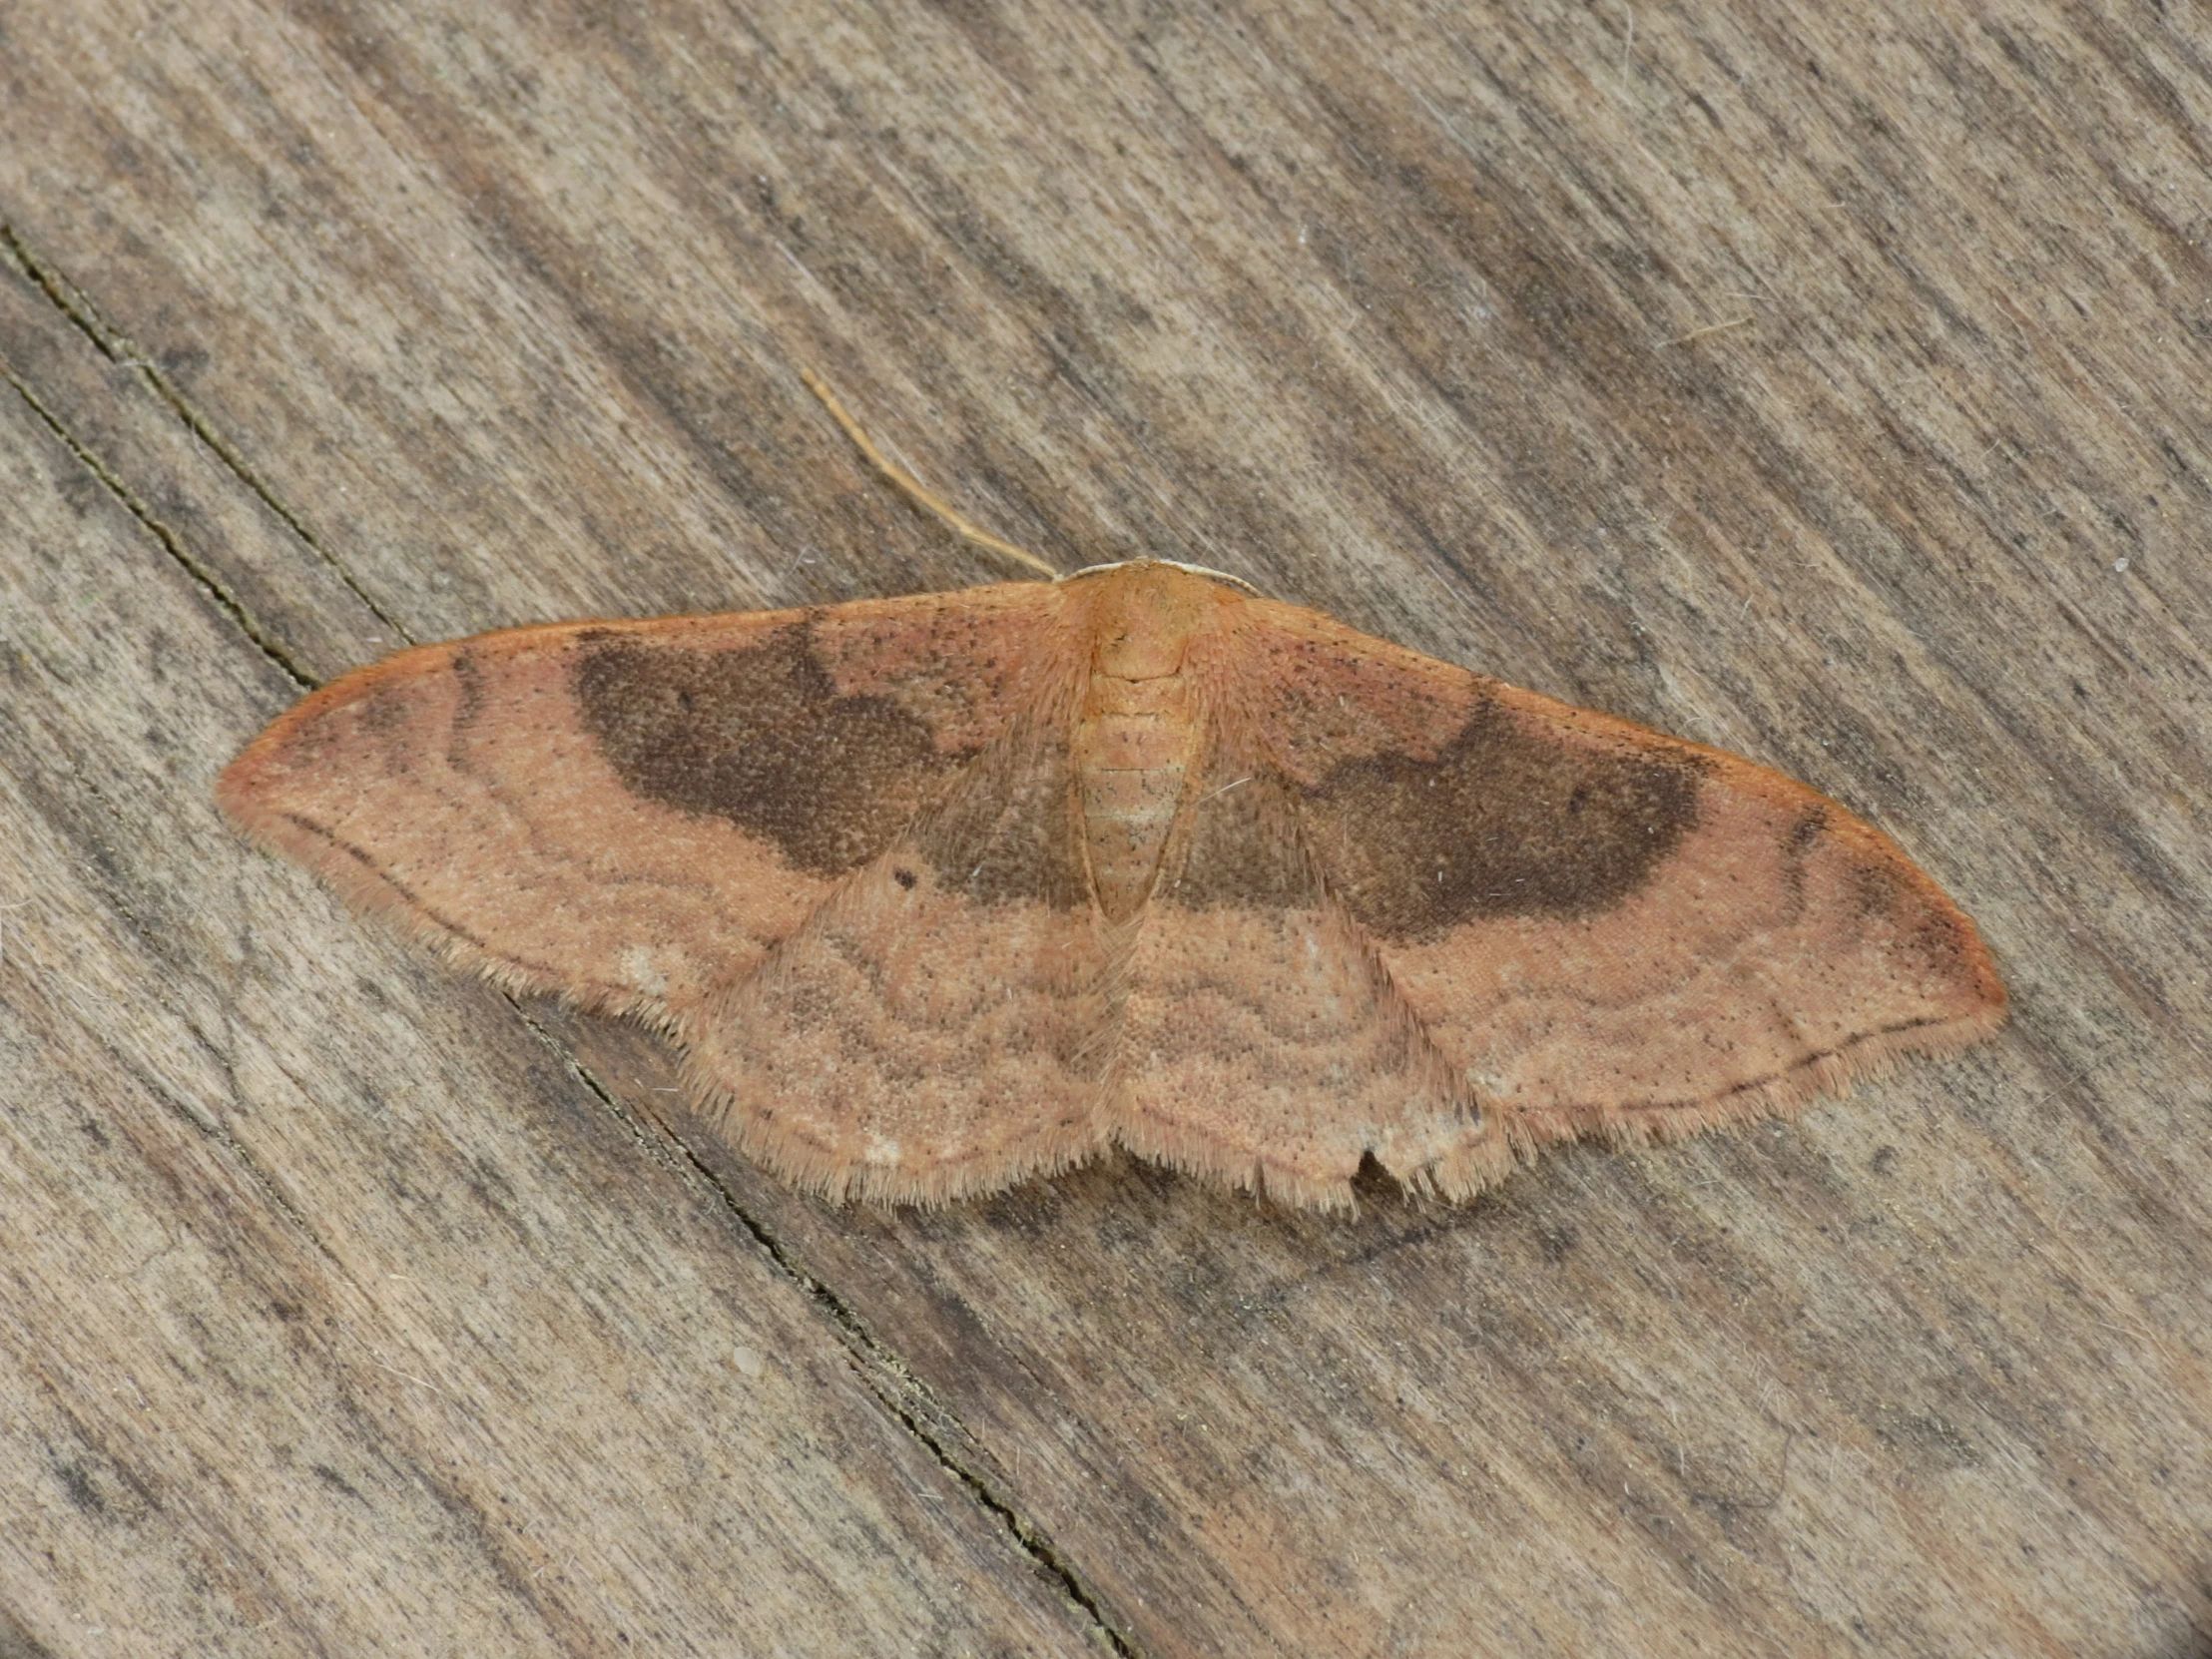 a brown moth on wood textured surface with grass